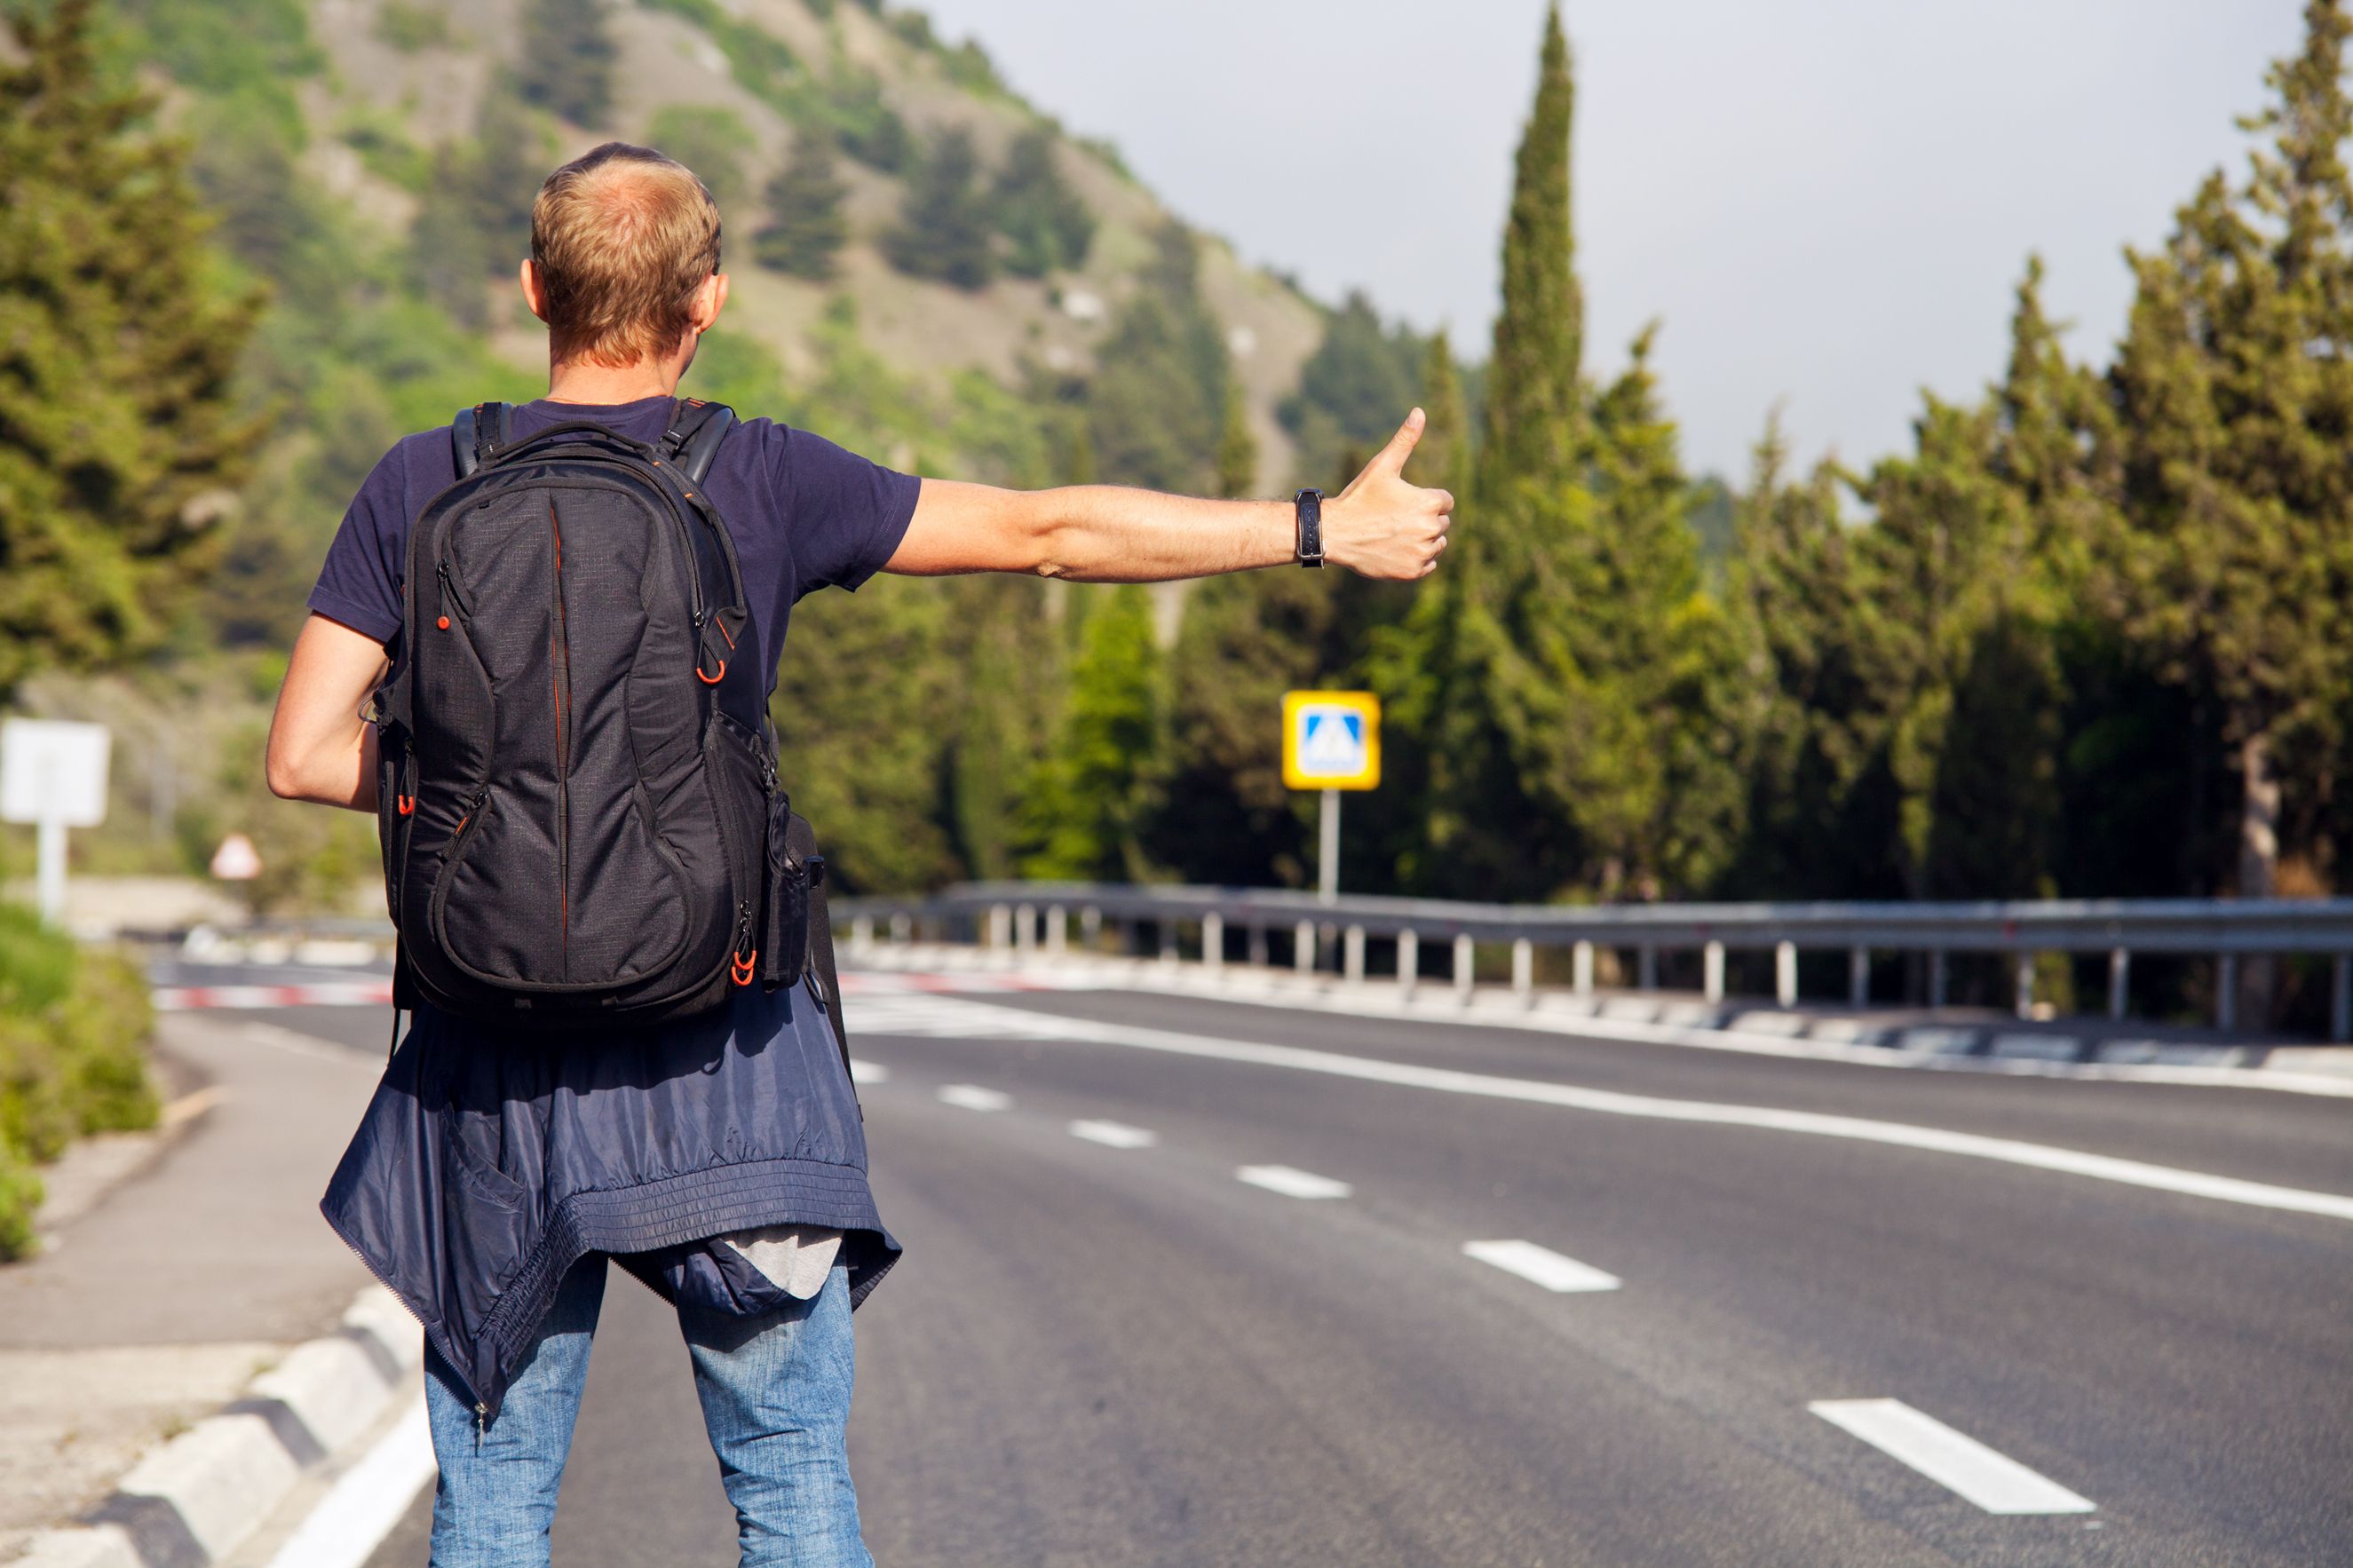 Become a hitchhiker